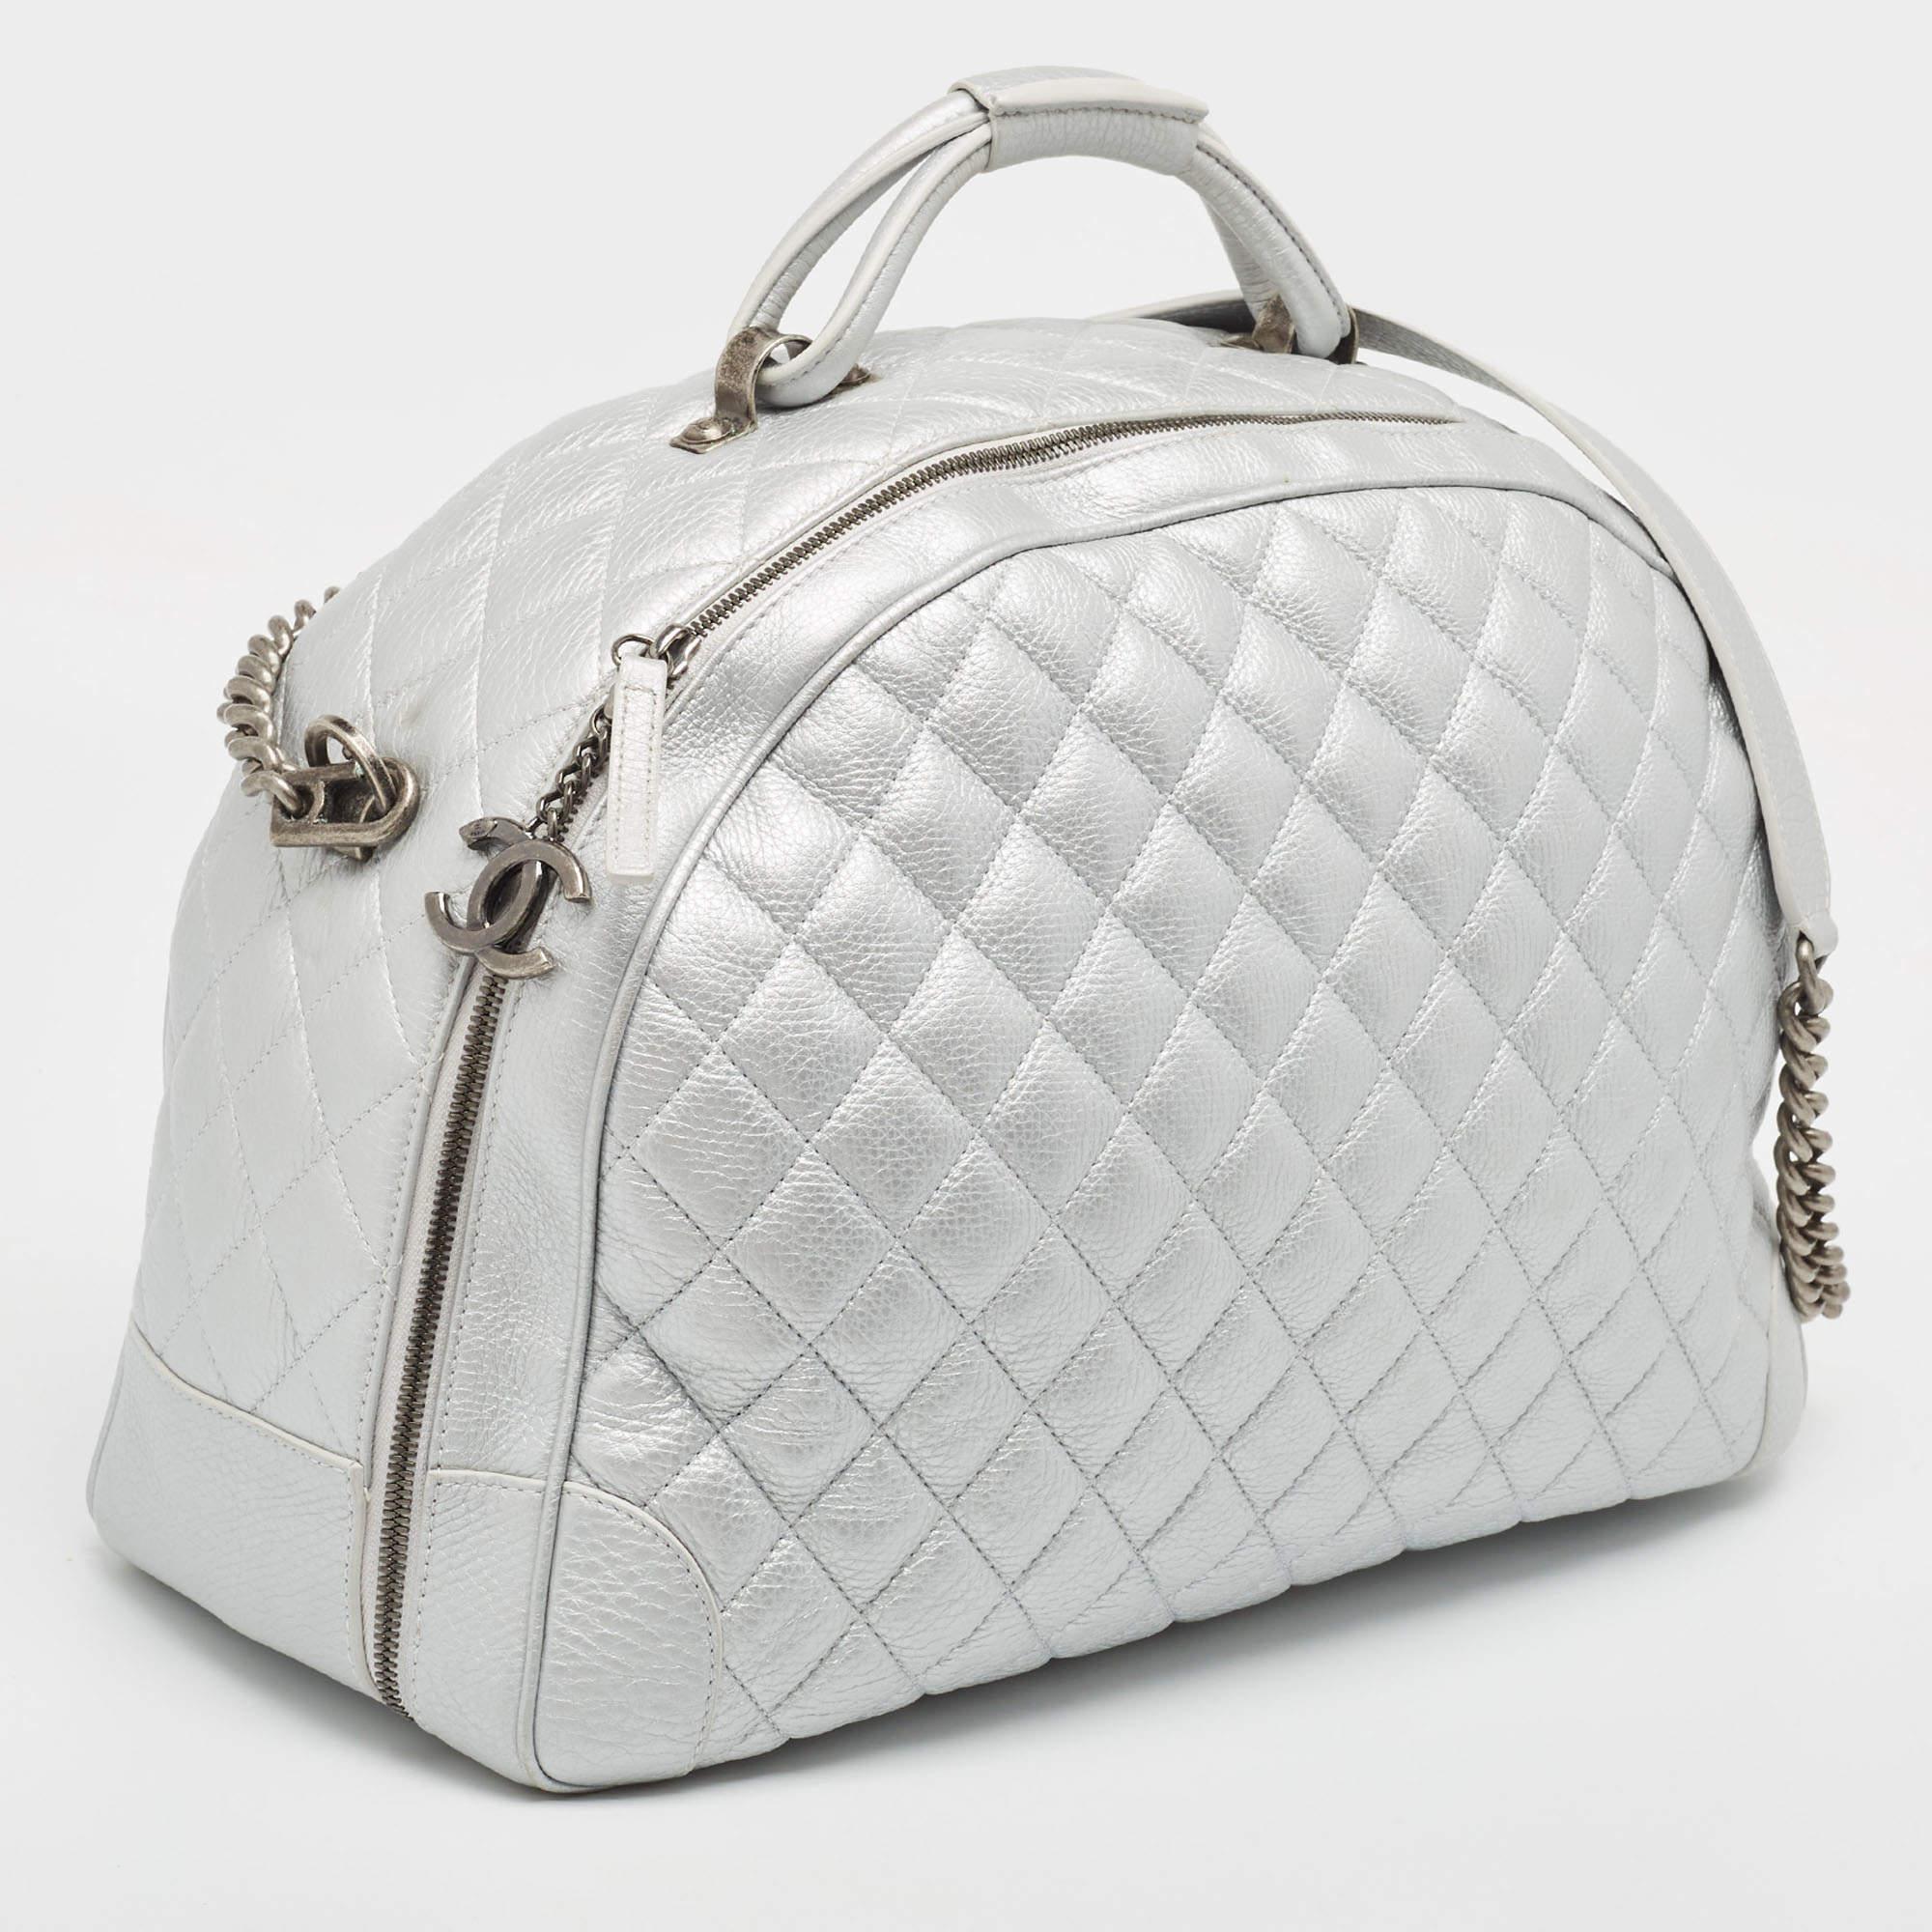 Women's Chanel Metallic Grey Quilted Leather Airlines Round Trip Bowler Bag For Sale